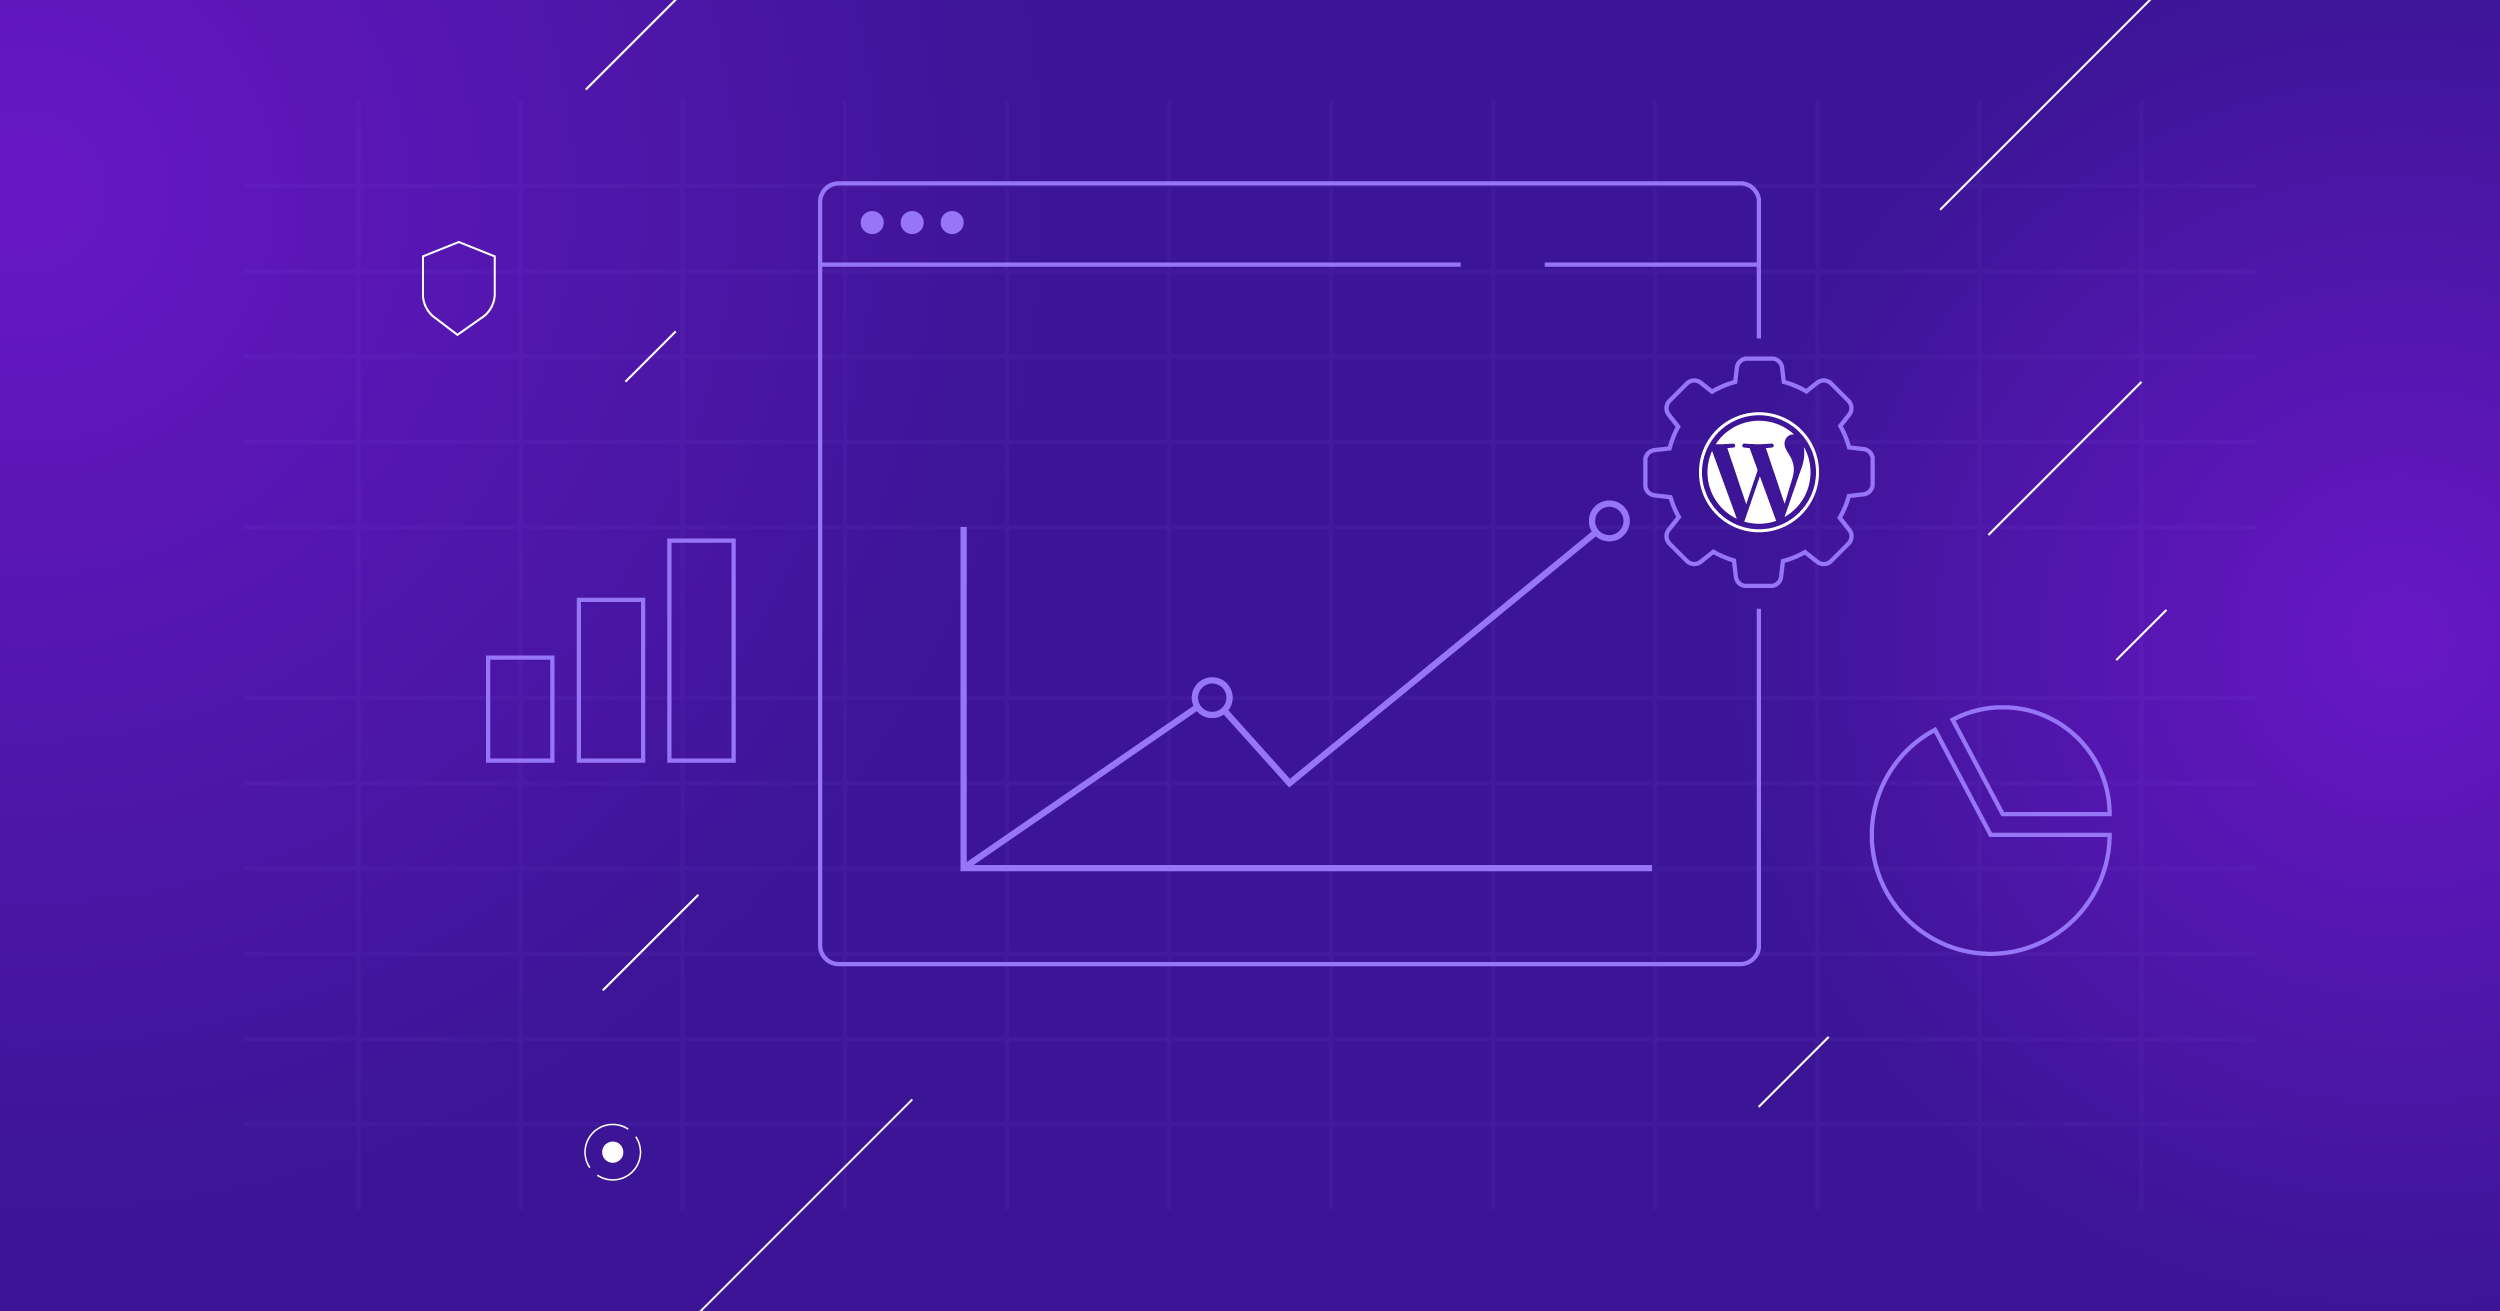 A simple, light purple outline Illustration of a line chart in a desktop user interface window overlaid with a small WordPress logo.